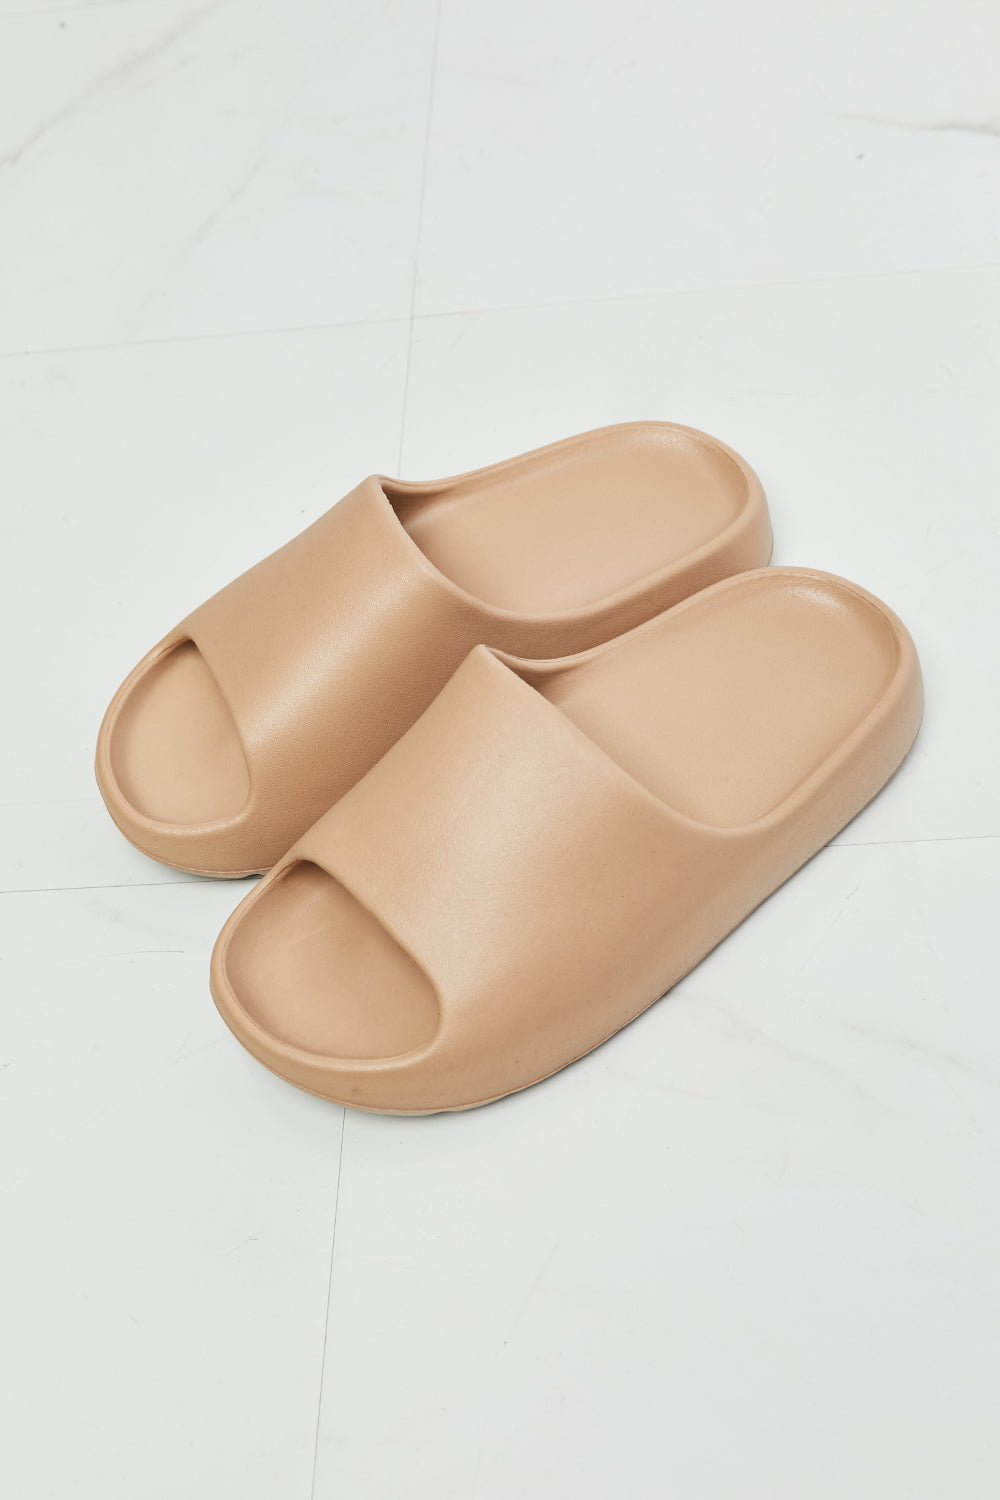 NOOK JOI In My Comfort Zone Slides in Beige - Cheeky Chic Boutique